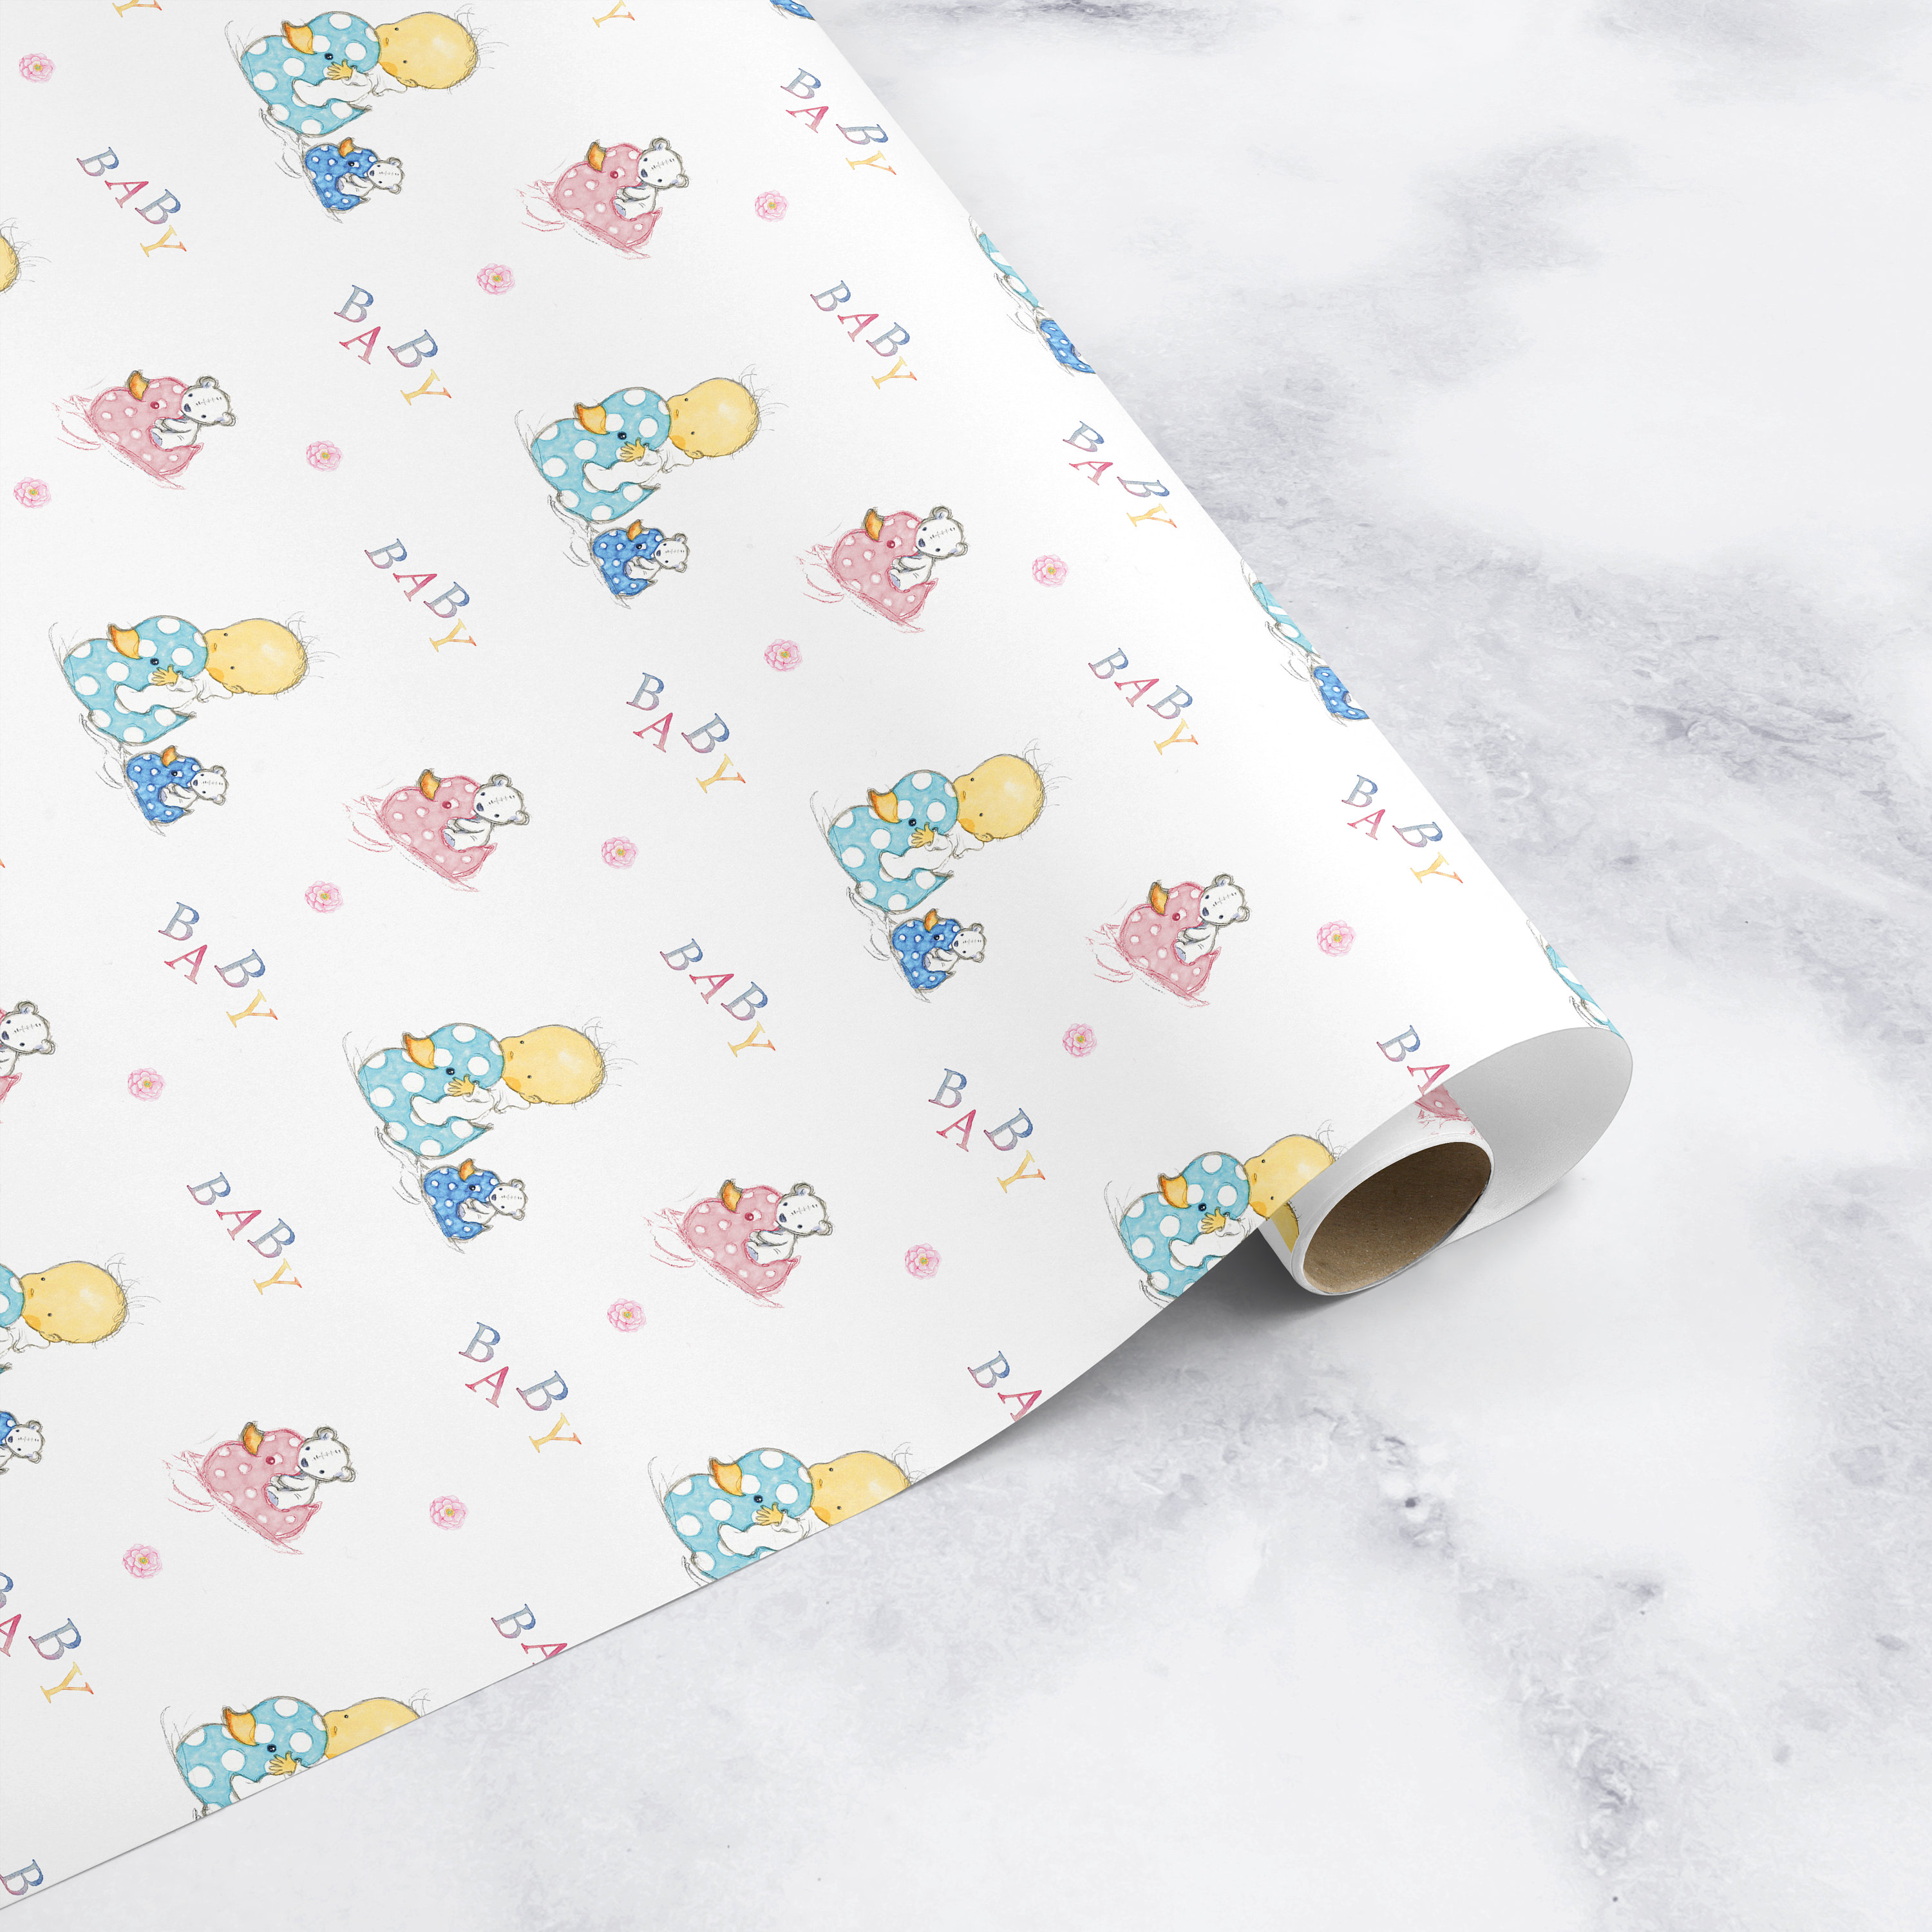 Buy New Baby Wrapping Paper, Baby Shower Gift Wrap, Boy Girl Unisex Gender  Neutral, Grandson Daughter, Gender Reveal Gift, Ideal as Decopatch Online  in India 